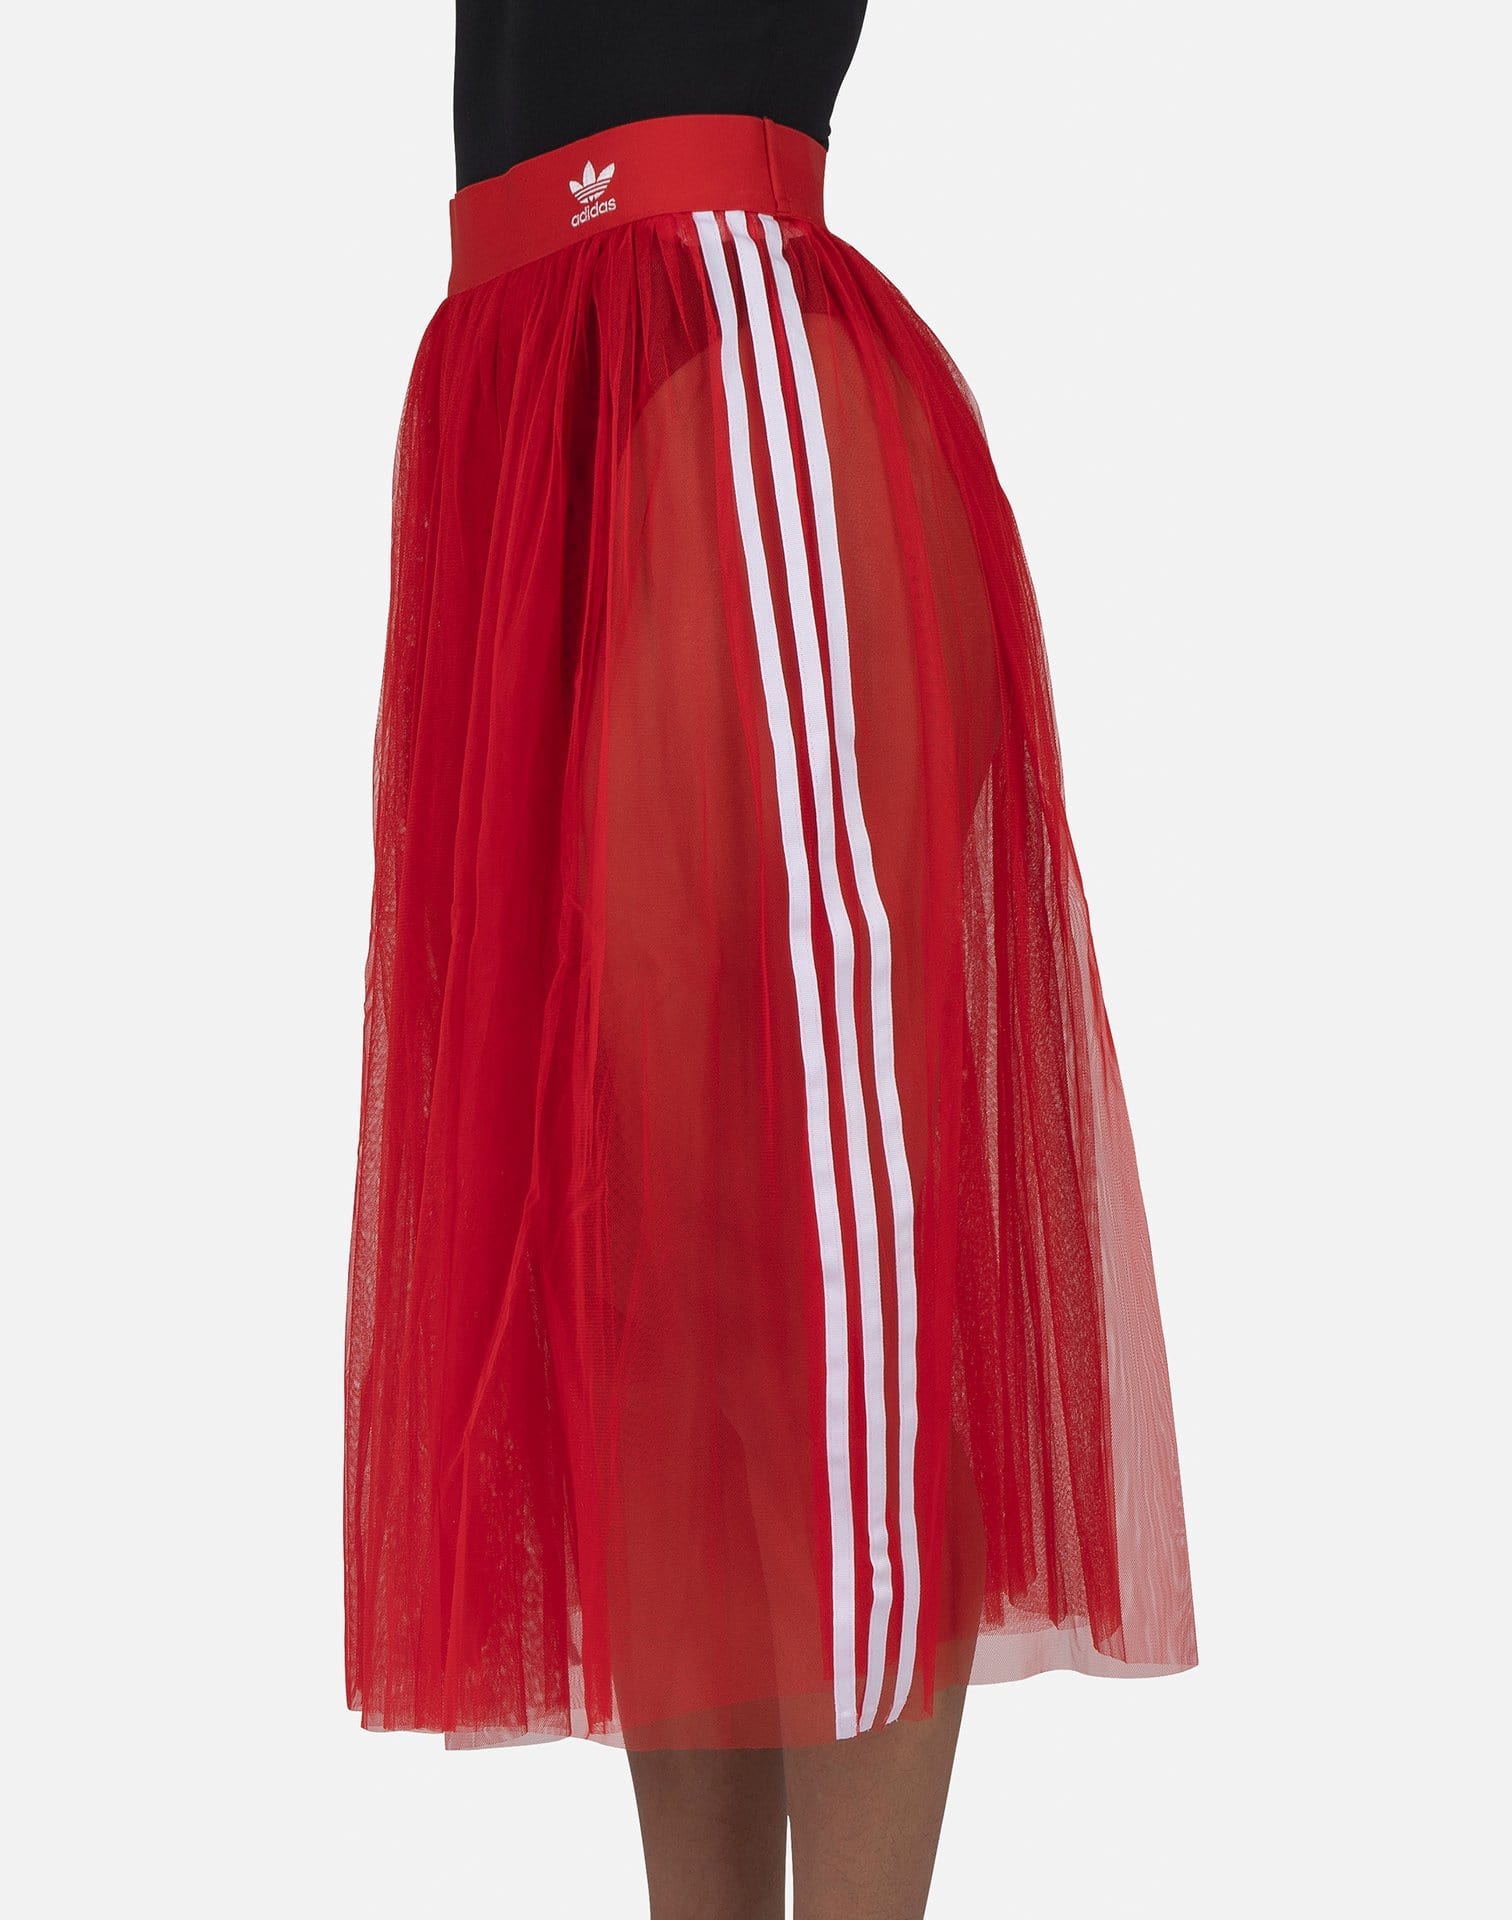 adidas red tulle skirt